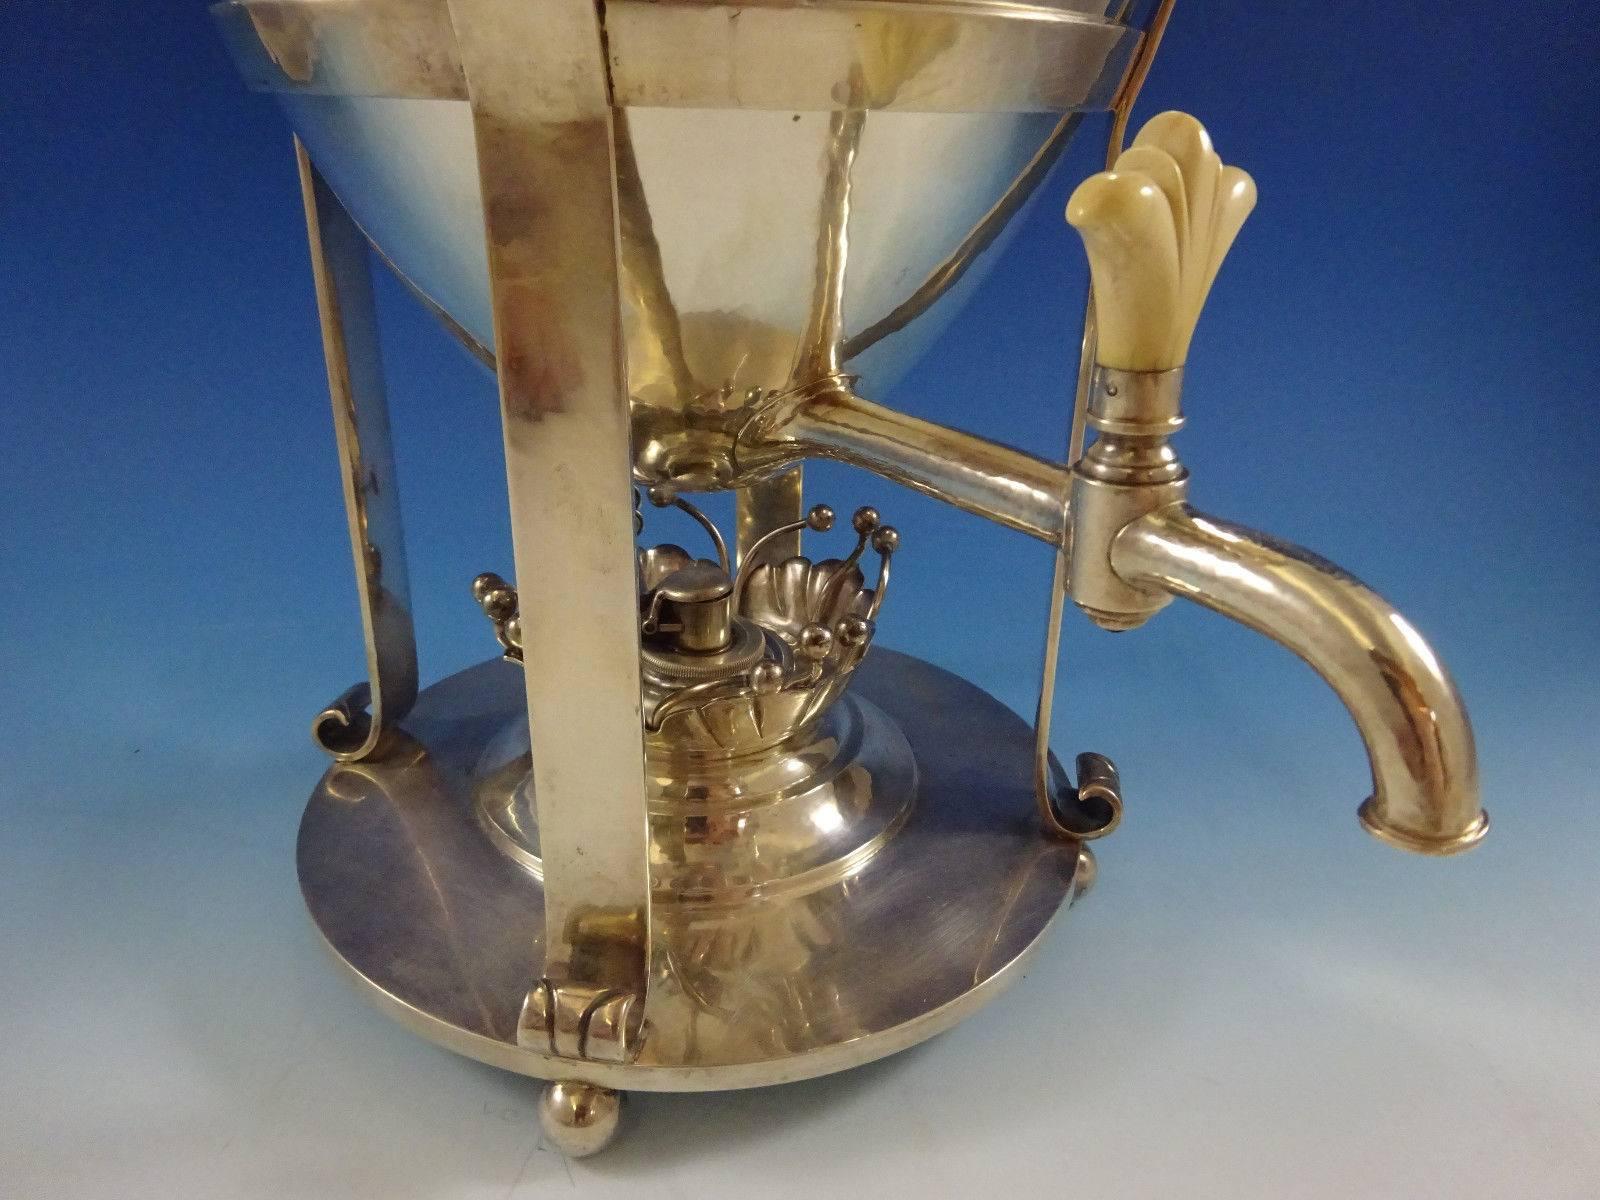 20th Century Blossom Randahl Chicago Sterling Silver Hot Water Urn Hand-Wrought Hollowware For Sale